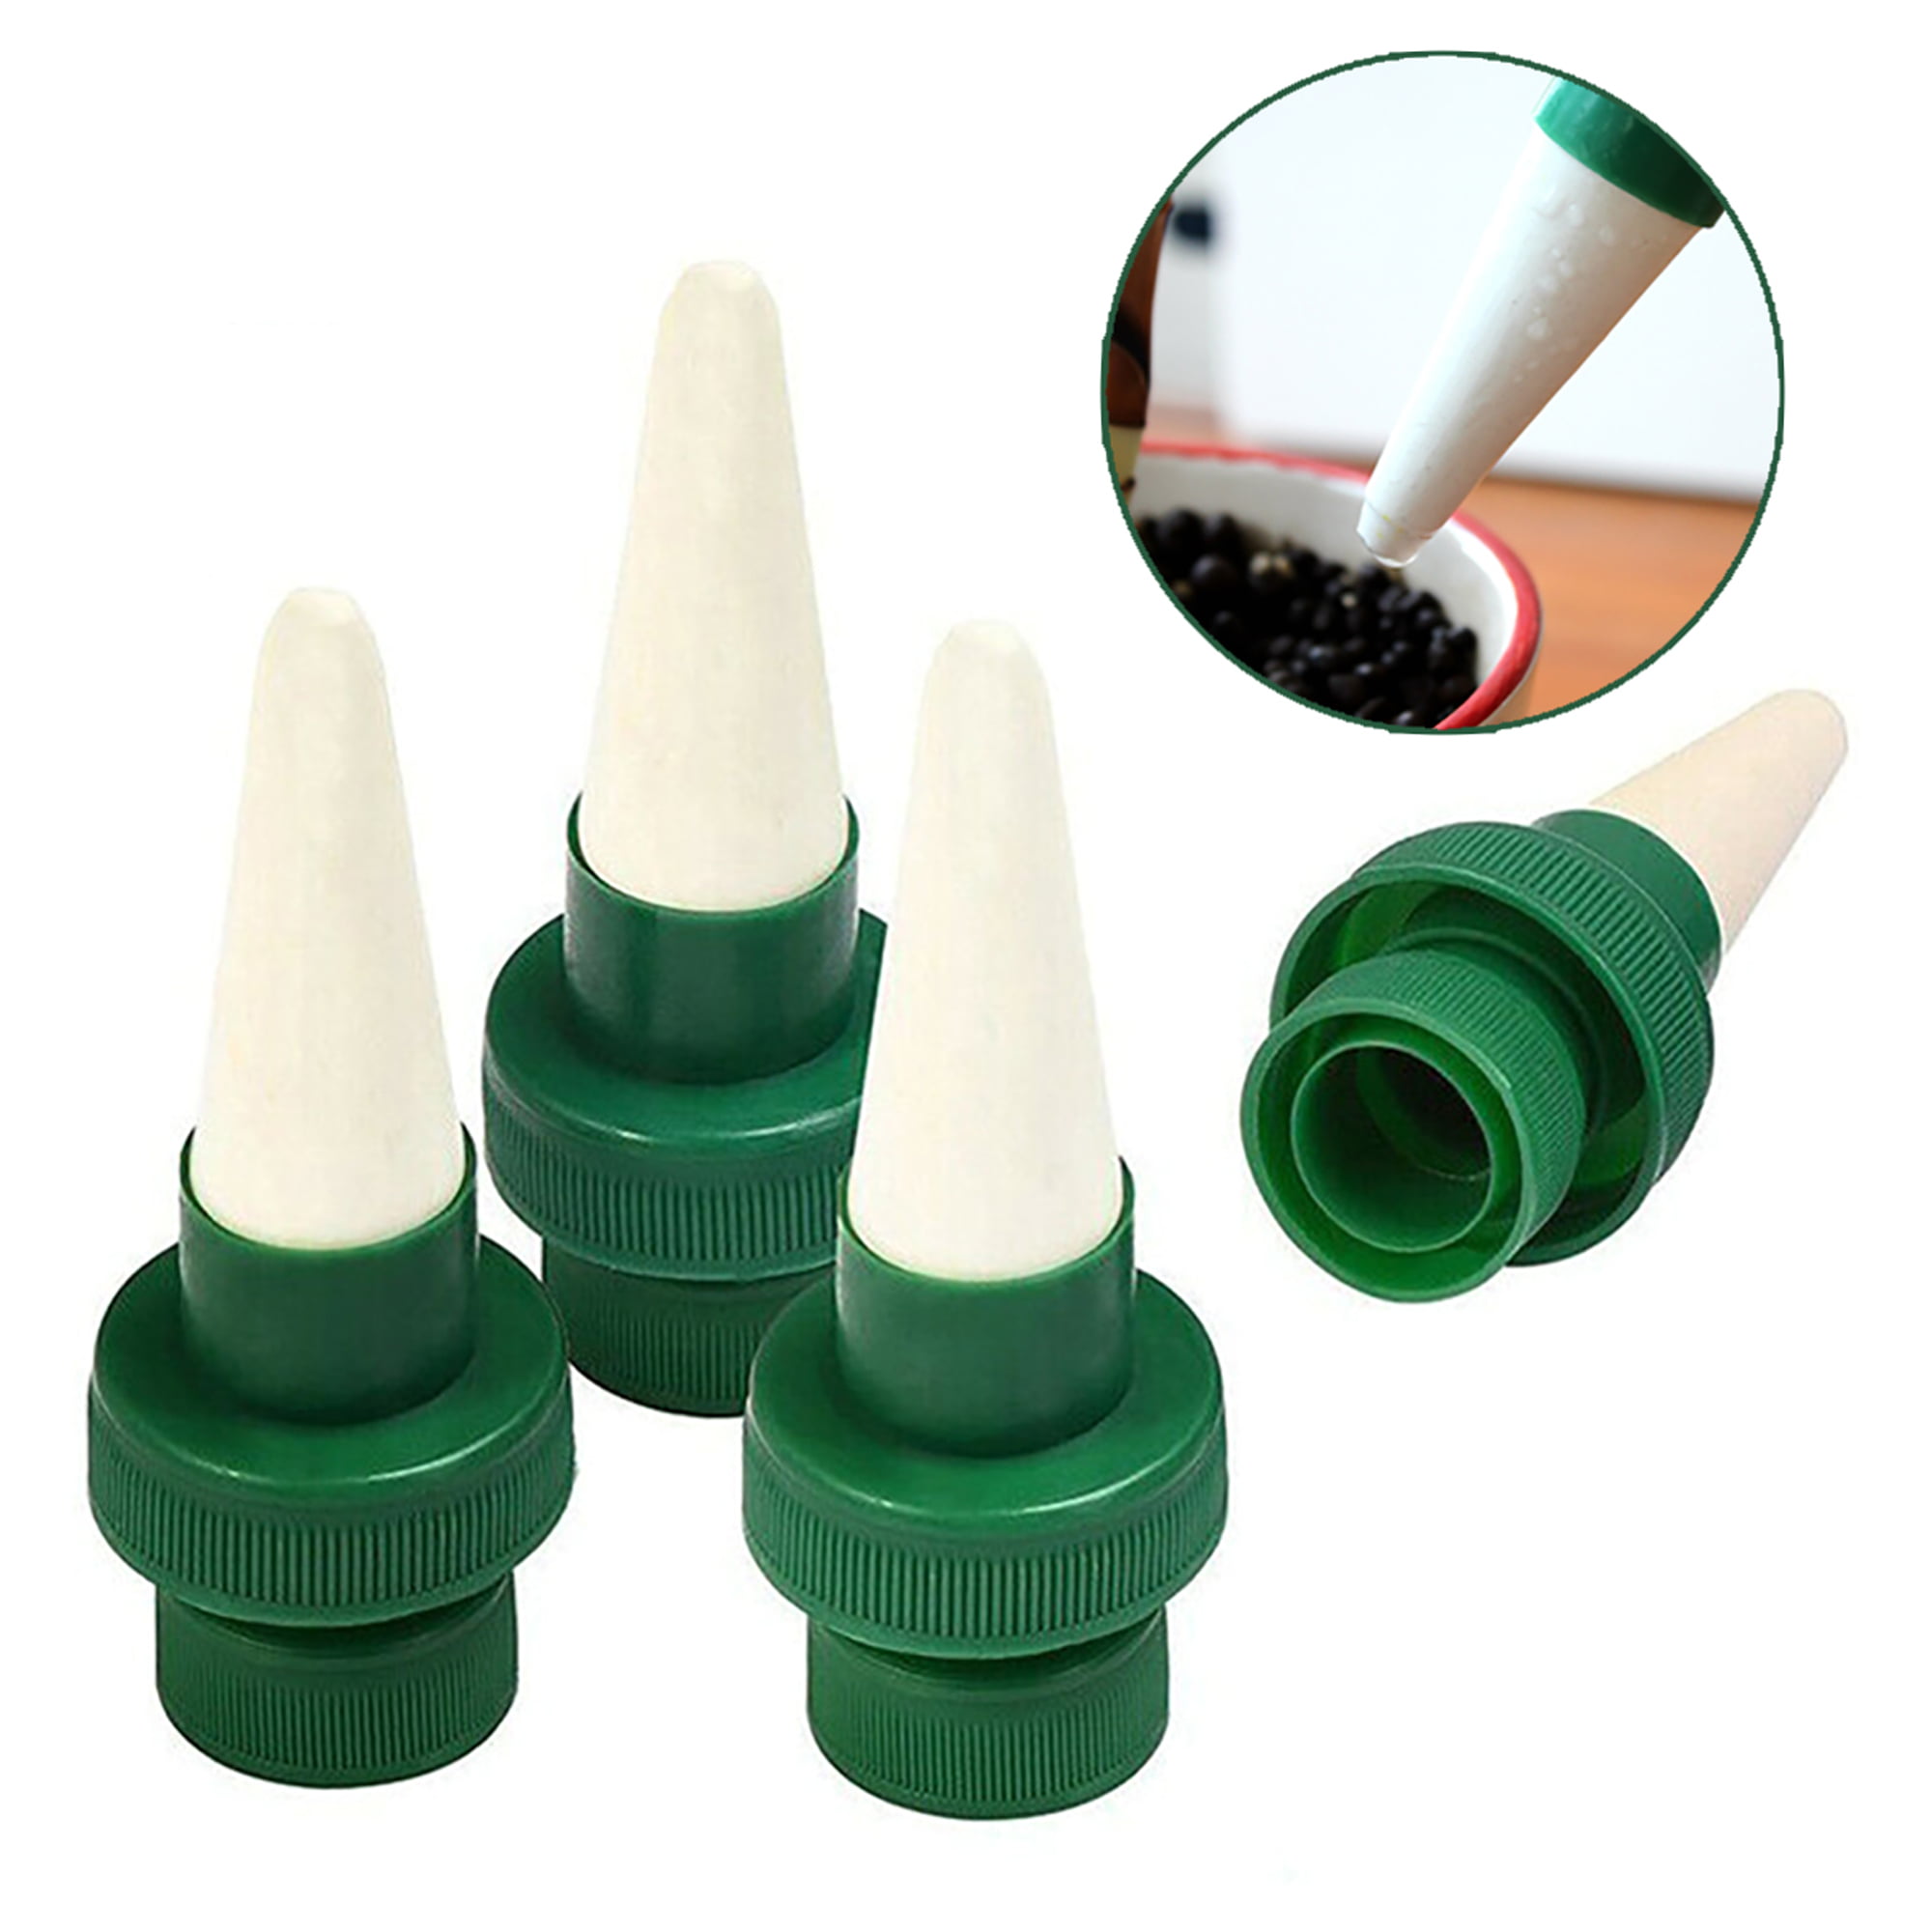 1PC Automatic Plant Waterer Ceramic Self Watering Spikes Flower Drip Garden Tool